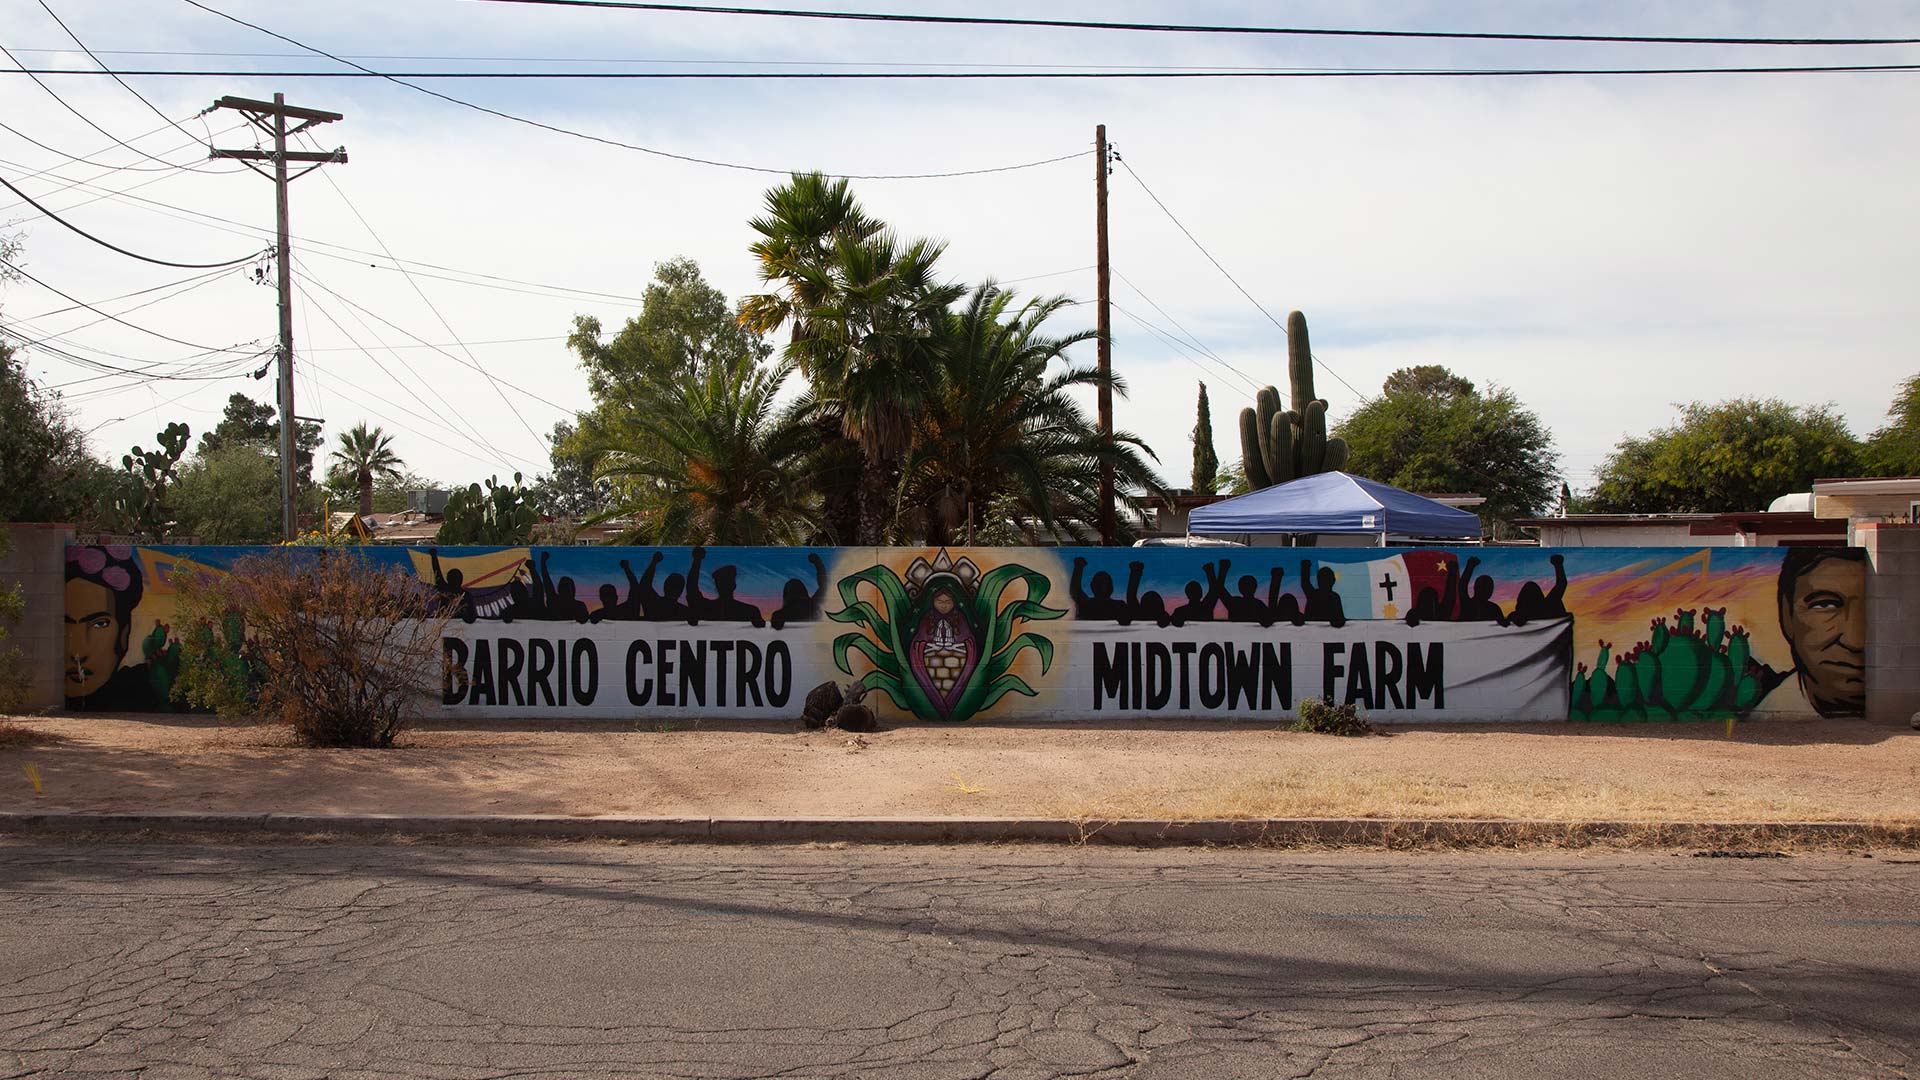 Flowers and Bullets is a grassroots movement that uses art and food to talk about larger issues, like gentrification or pollution, affecting Barrio Centro. This mural welcomes people visiting their Midtown Farm housed at the former Julia Keen Elementary School.